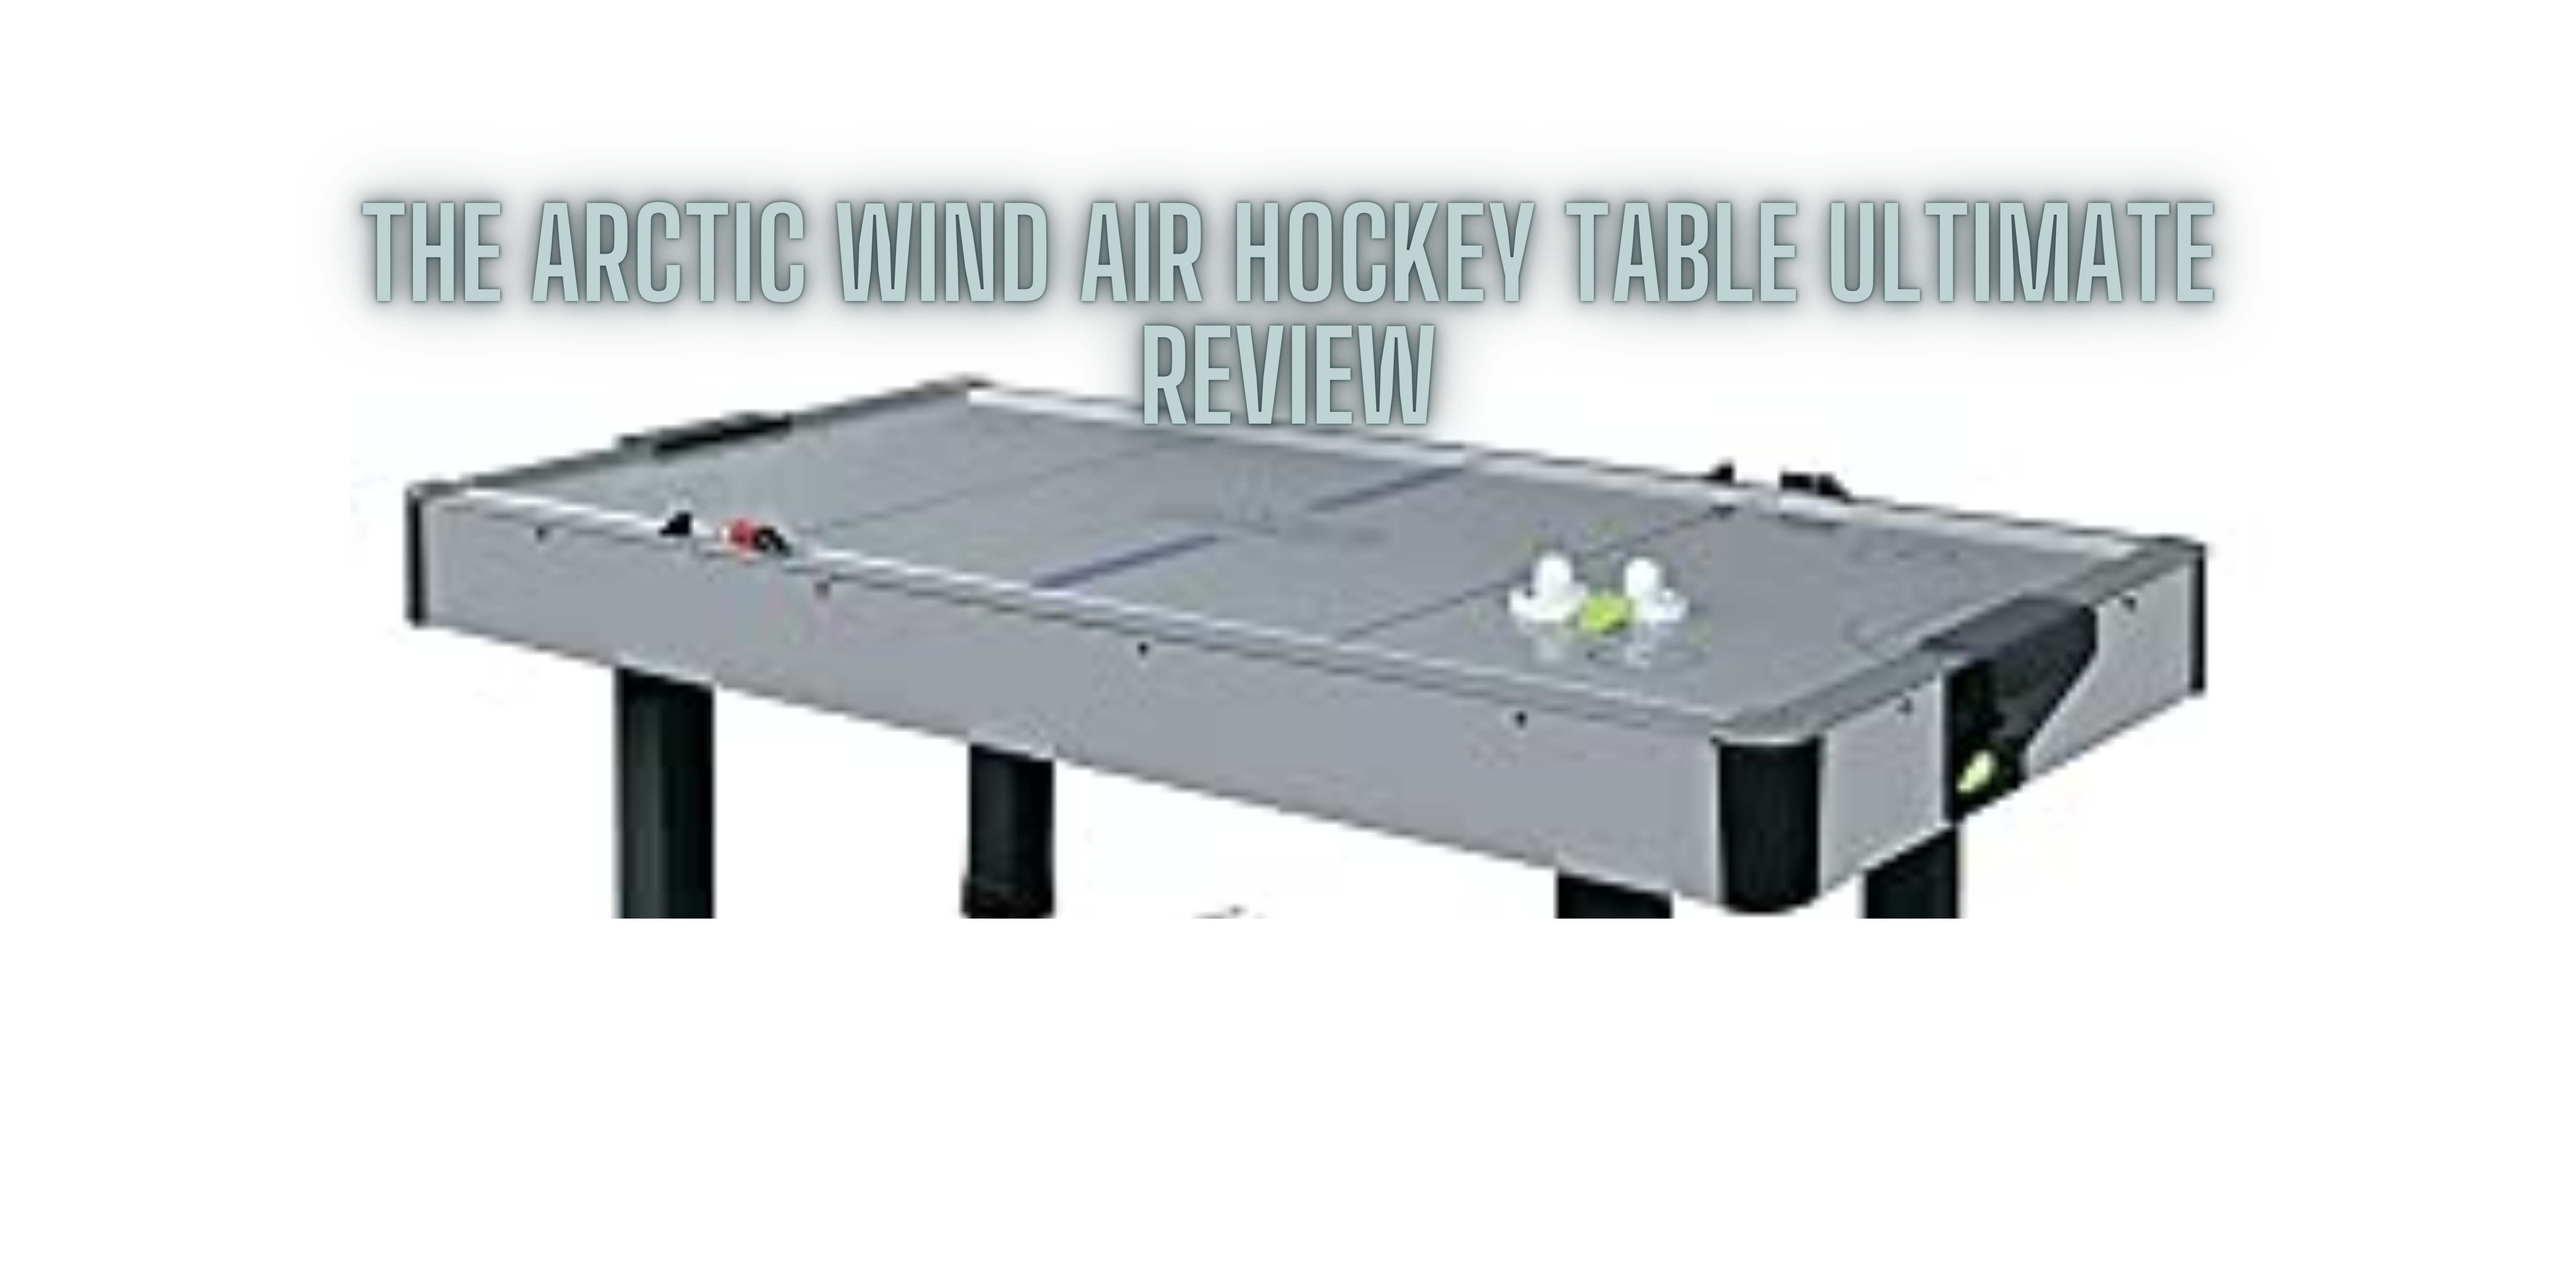 The Arctic Wind Air Hockey Table Ultimate Review